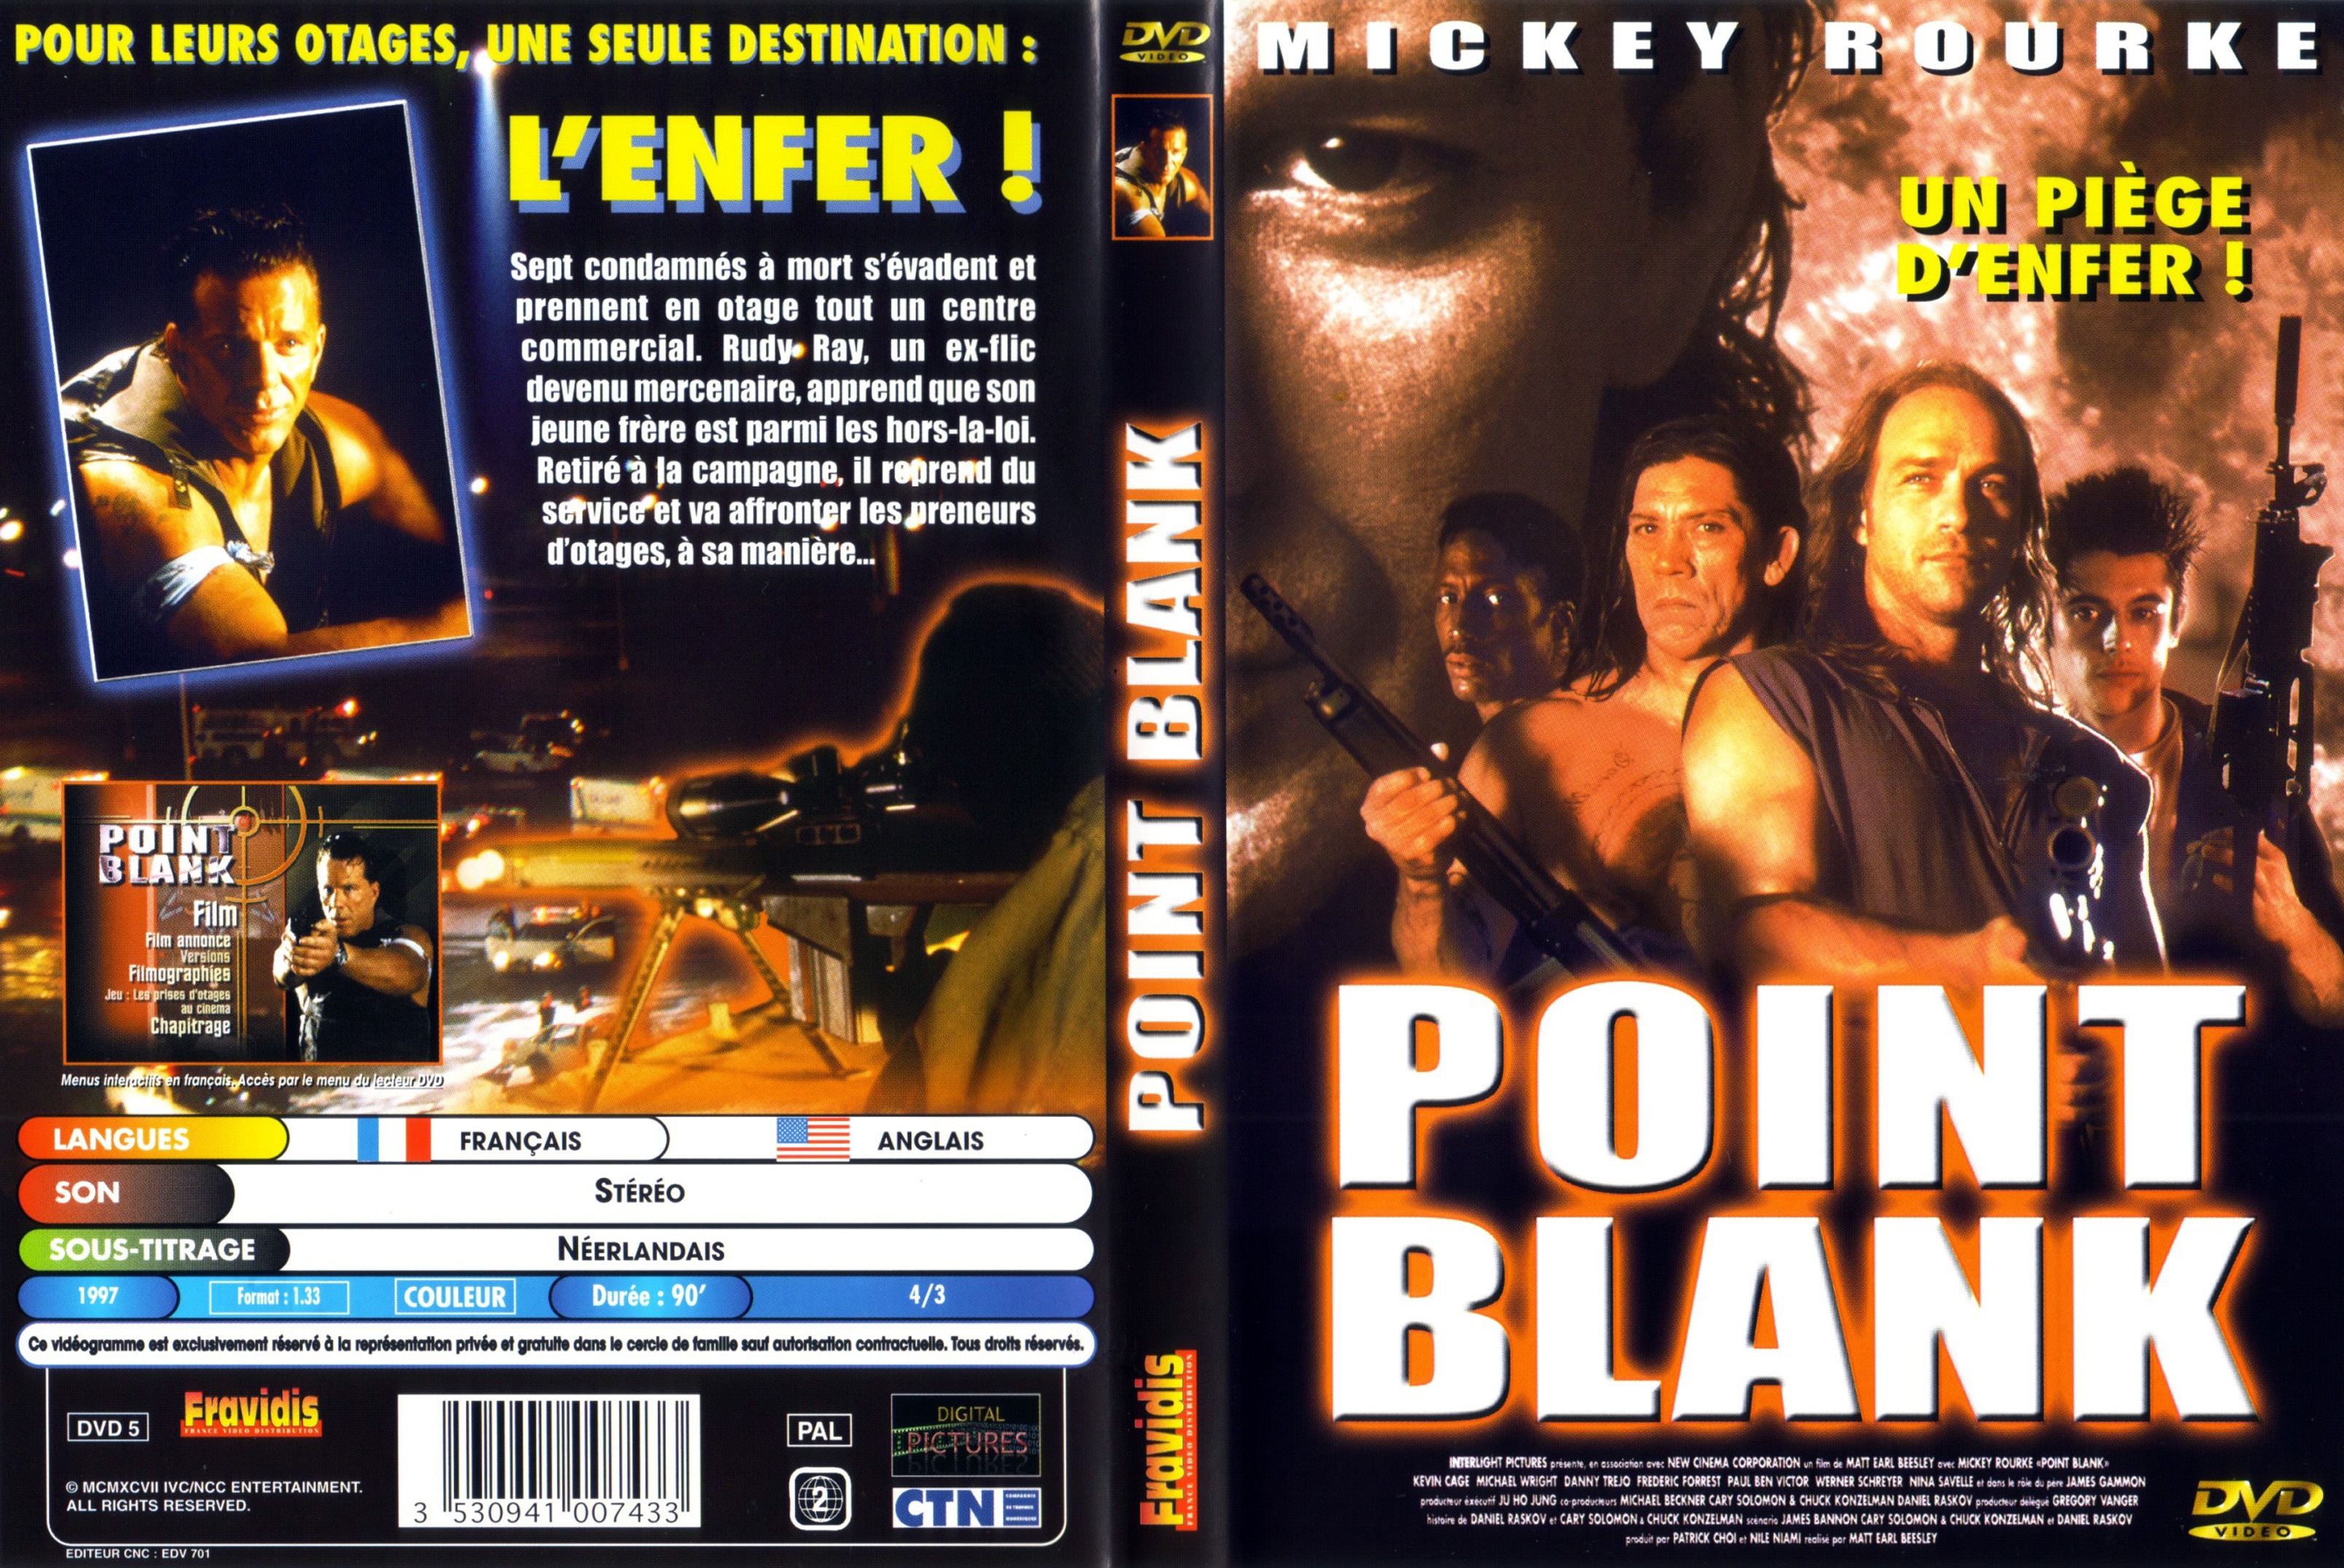 Jaquette DVD Point blank